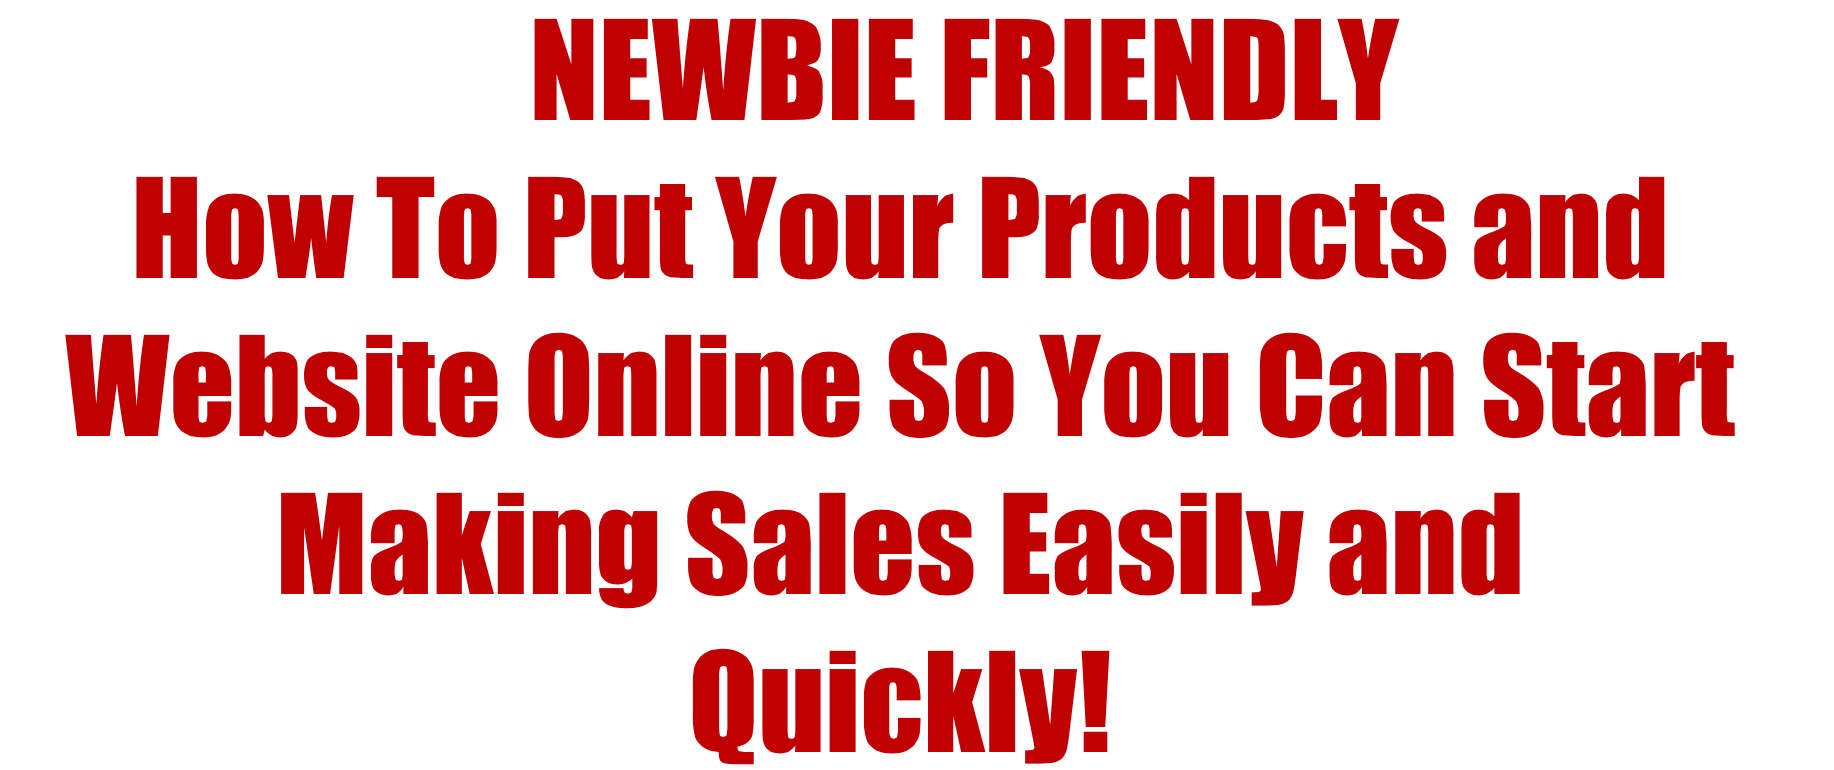 How to Get Your Product and Website Online